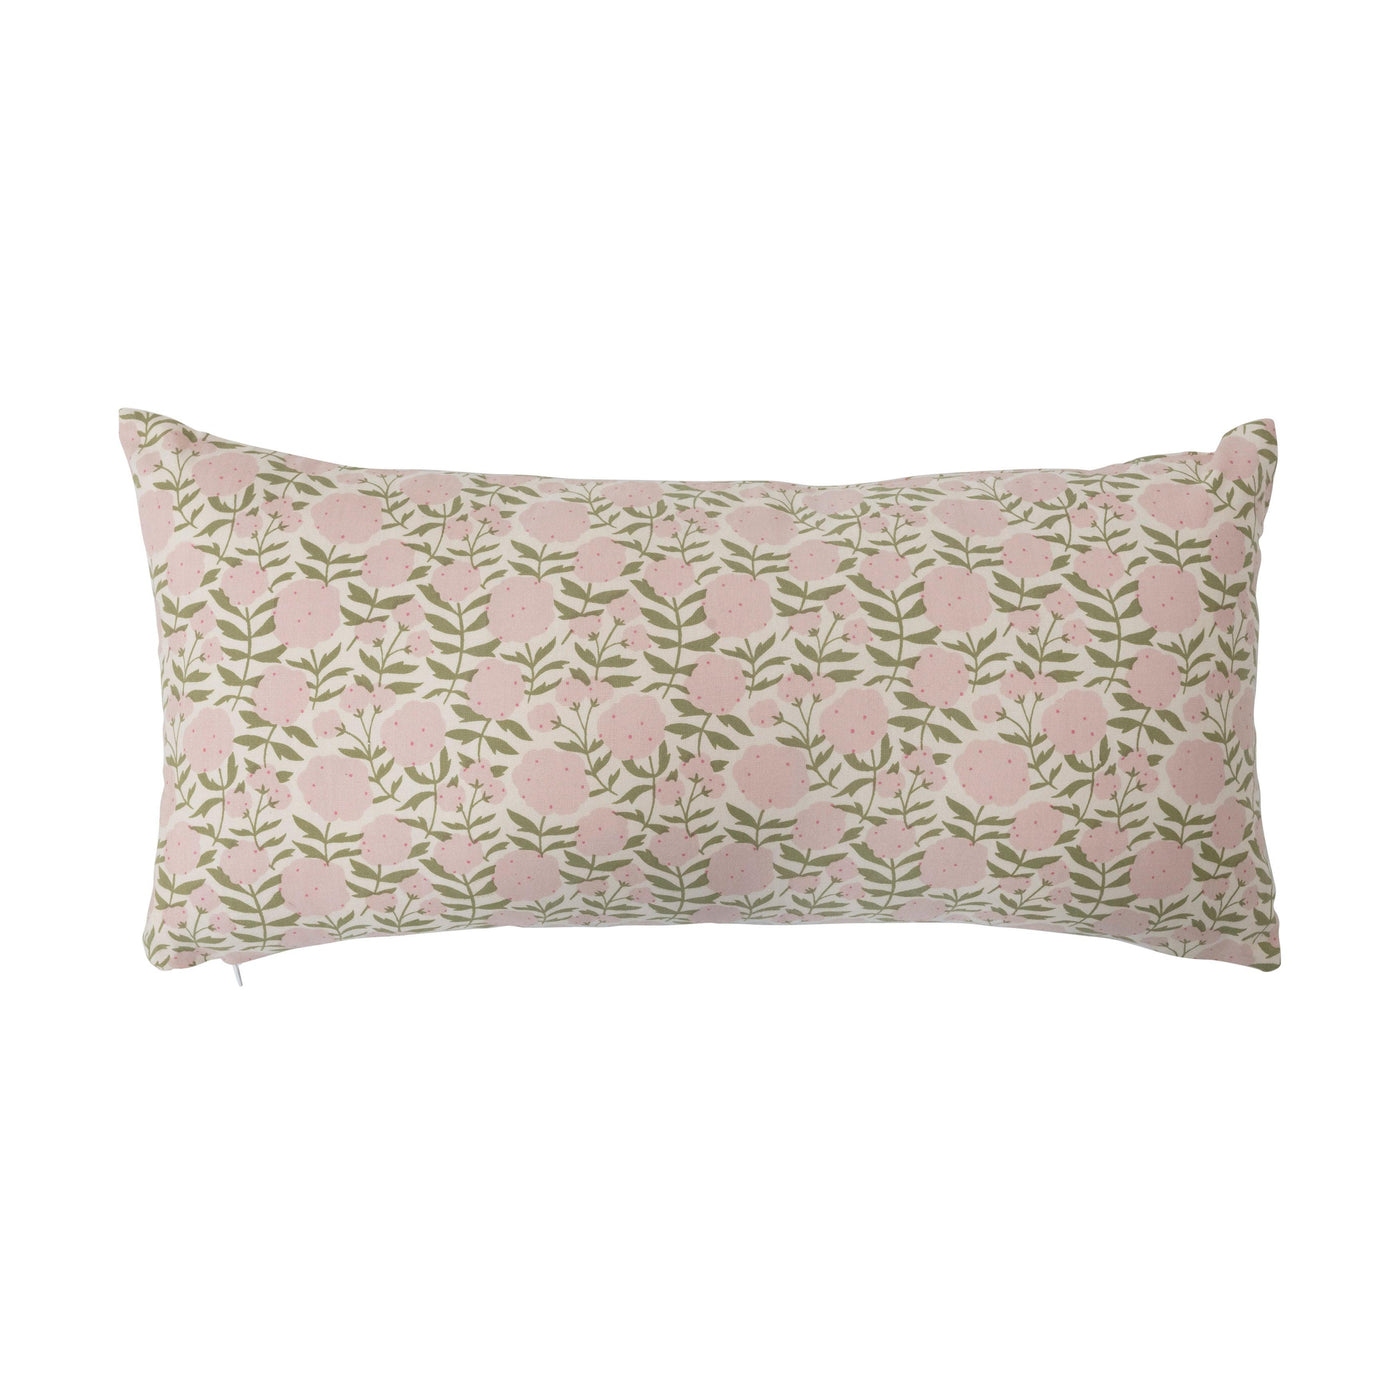 24" x 12" Pink Cotton Lumbar Pillow with Floral Pattern - Birch and Bind